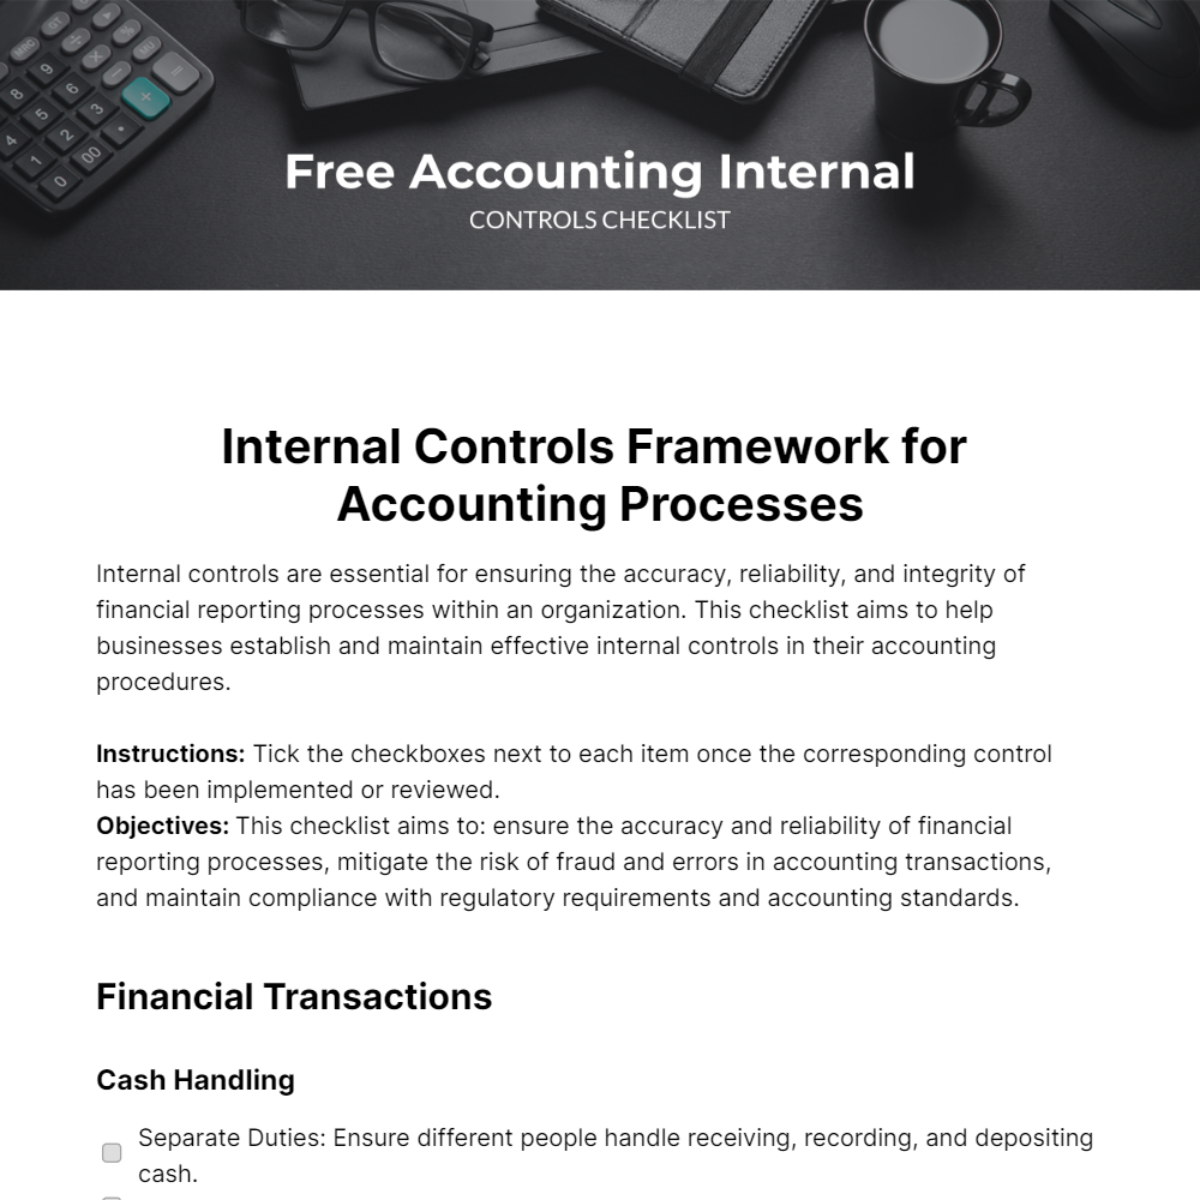 Free Accounting Internal Controls Checklist Template